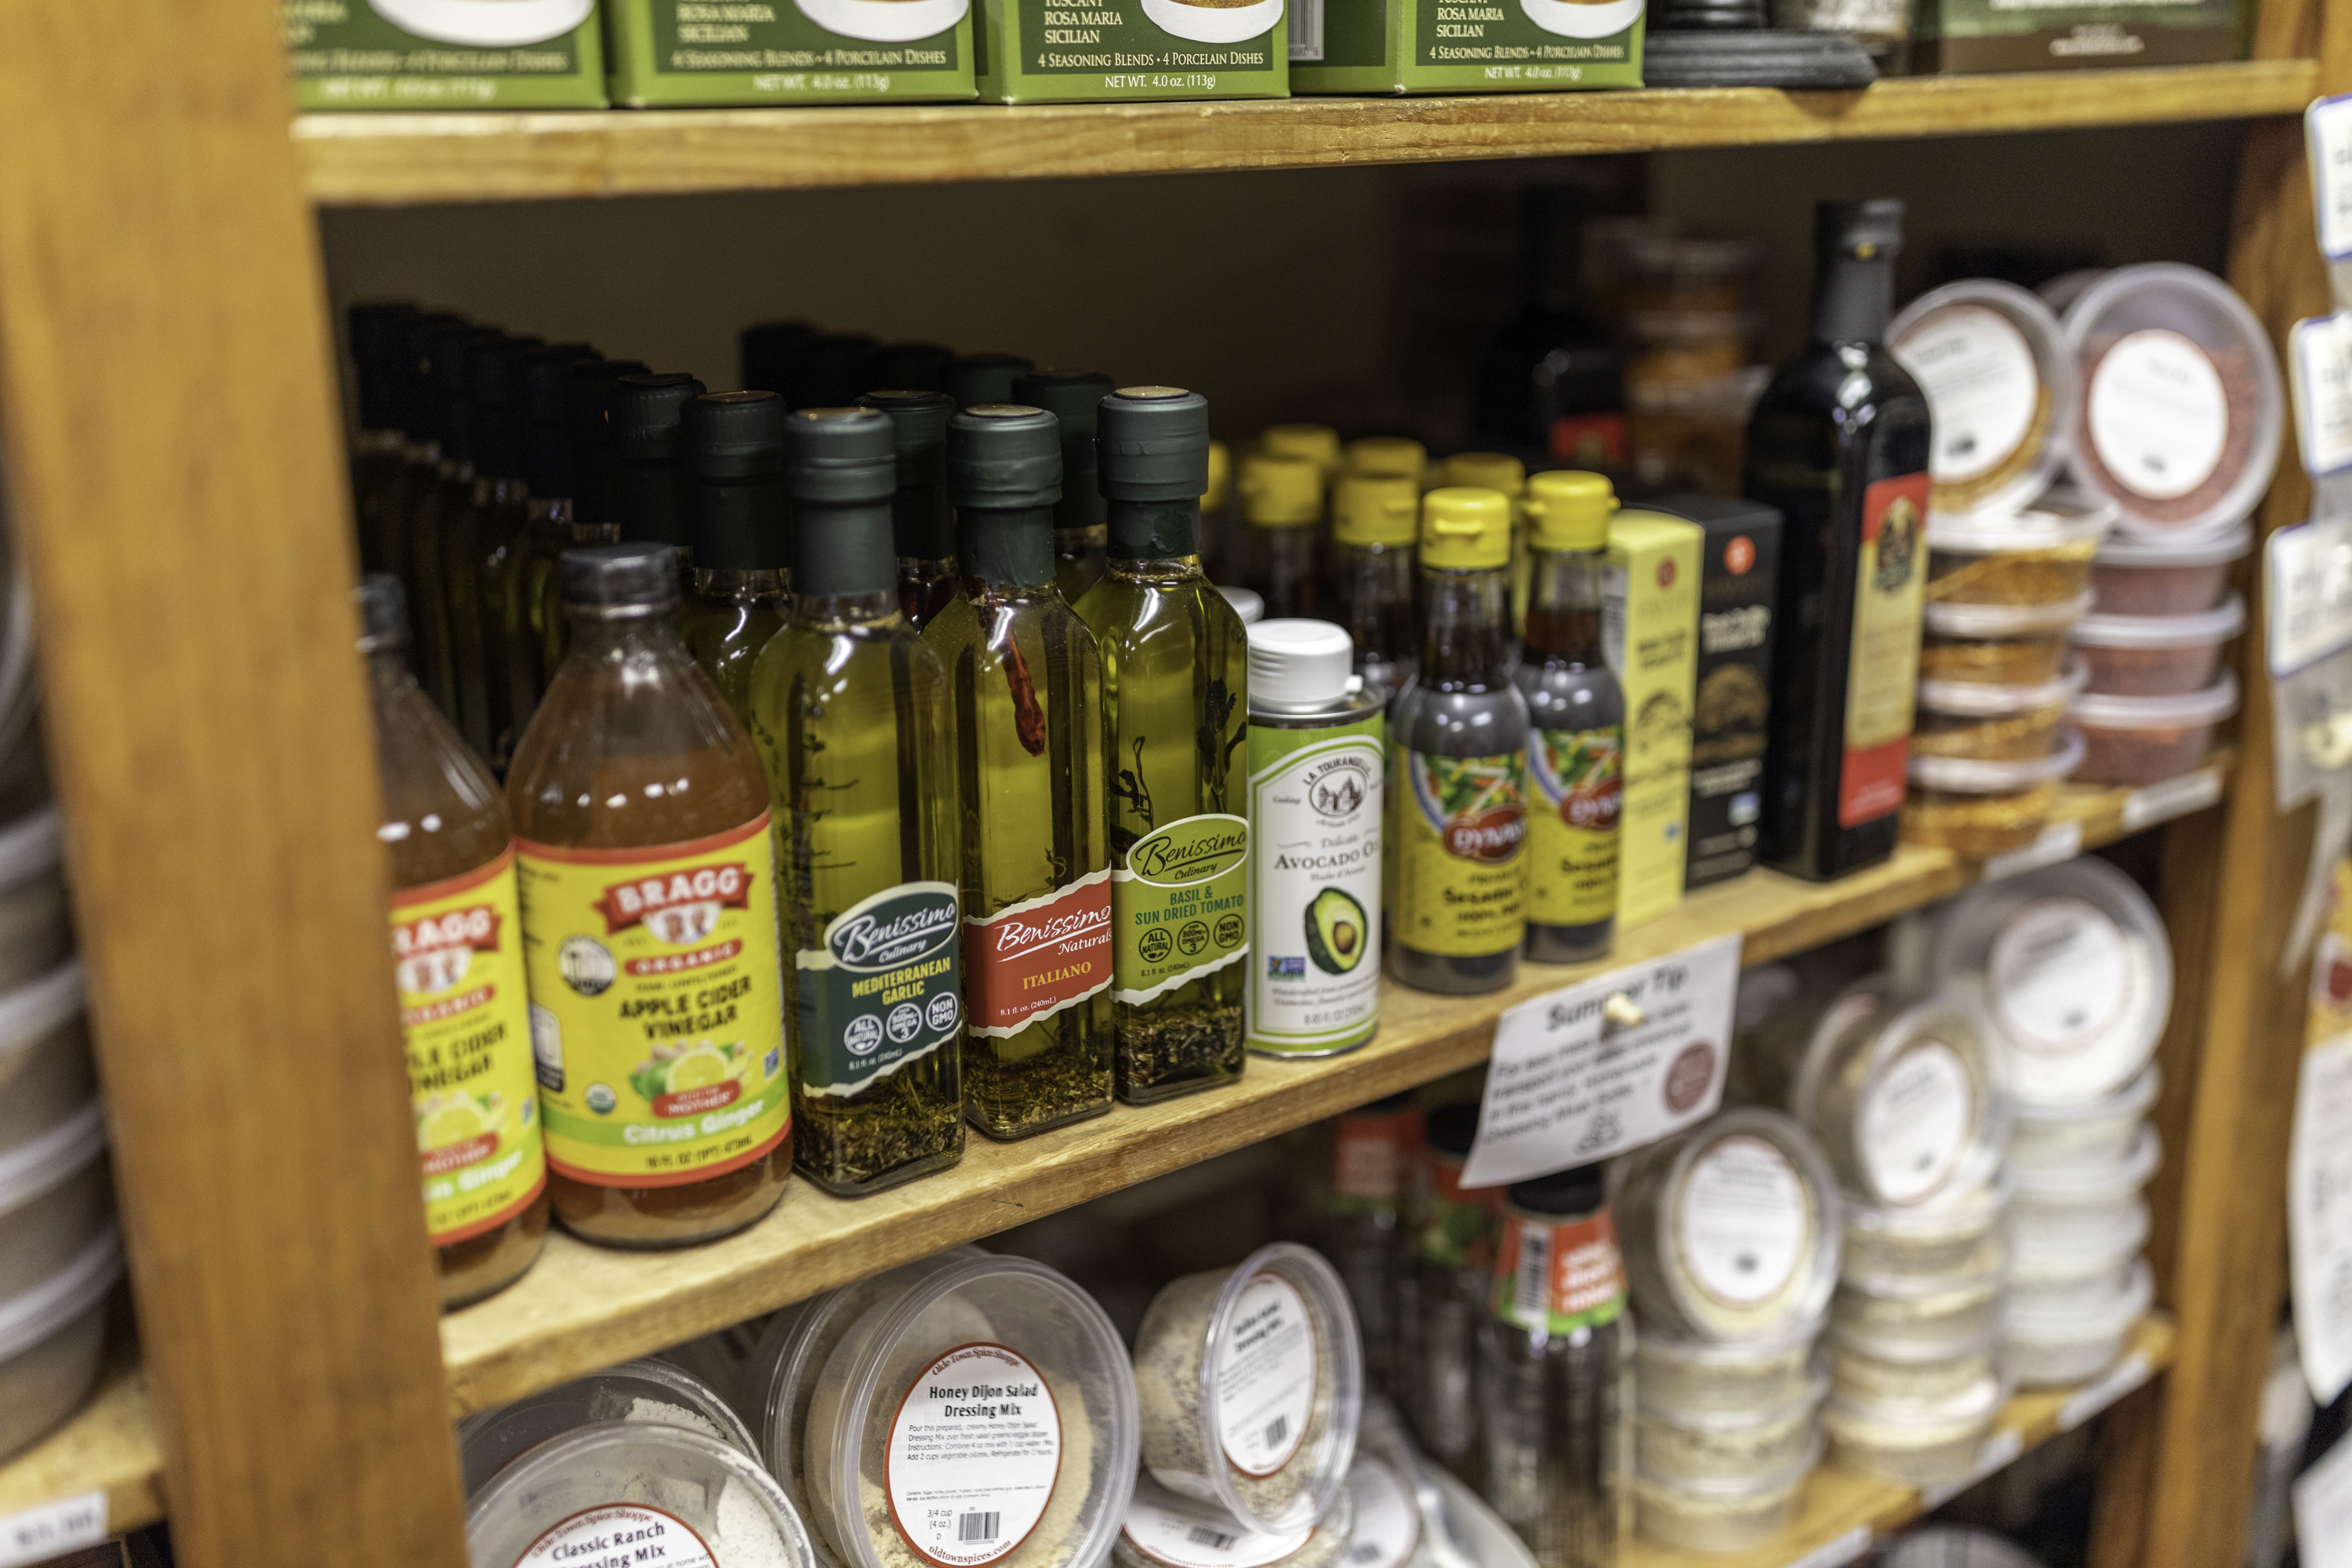 Gumbo File – Old Town Spice Shop